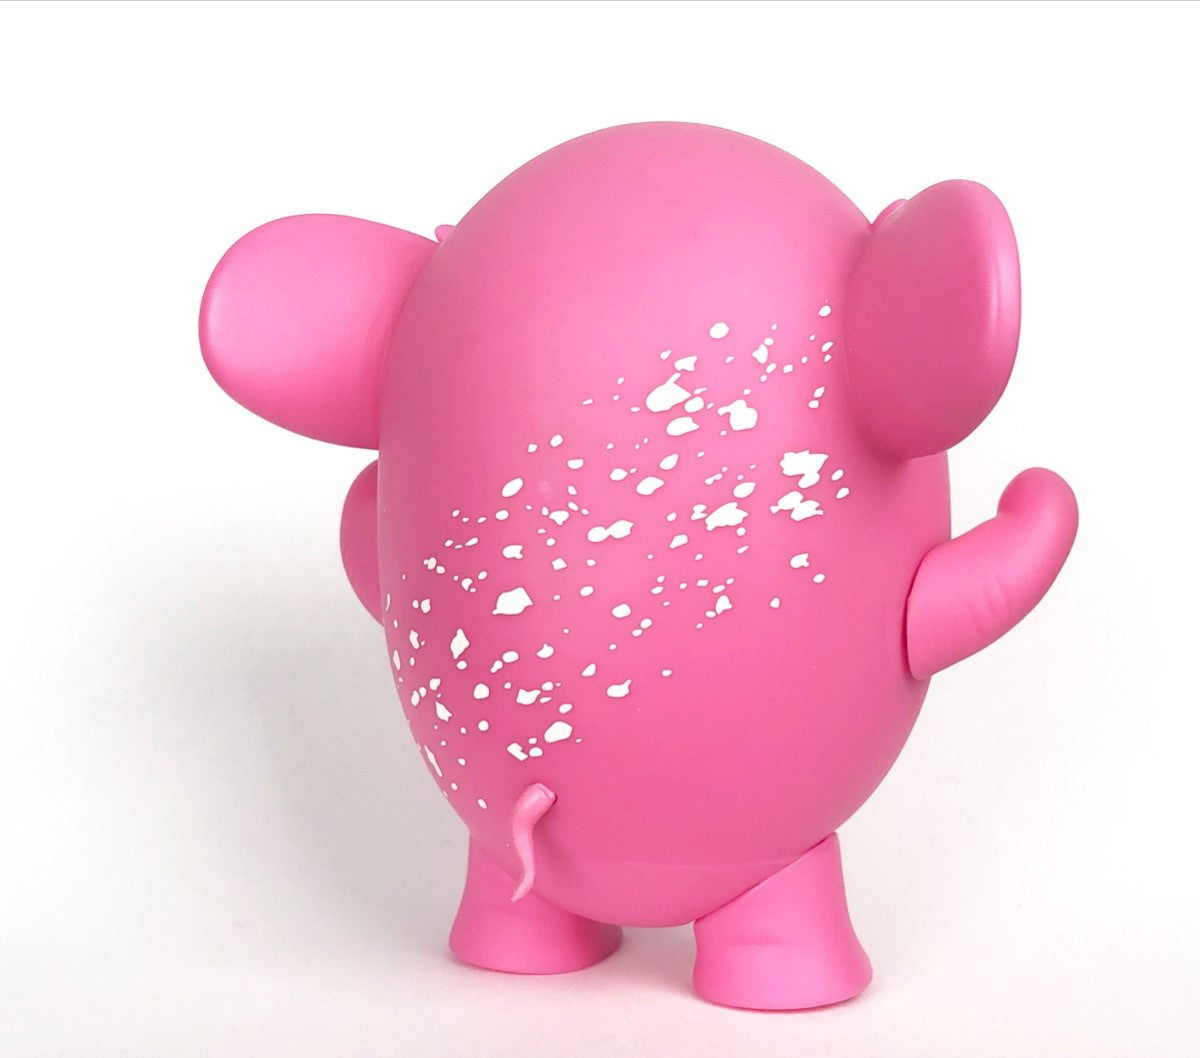 Charlie The Angry Elephant "OG Pink" Edition by AngelOnce